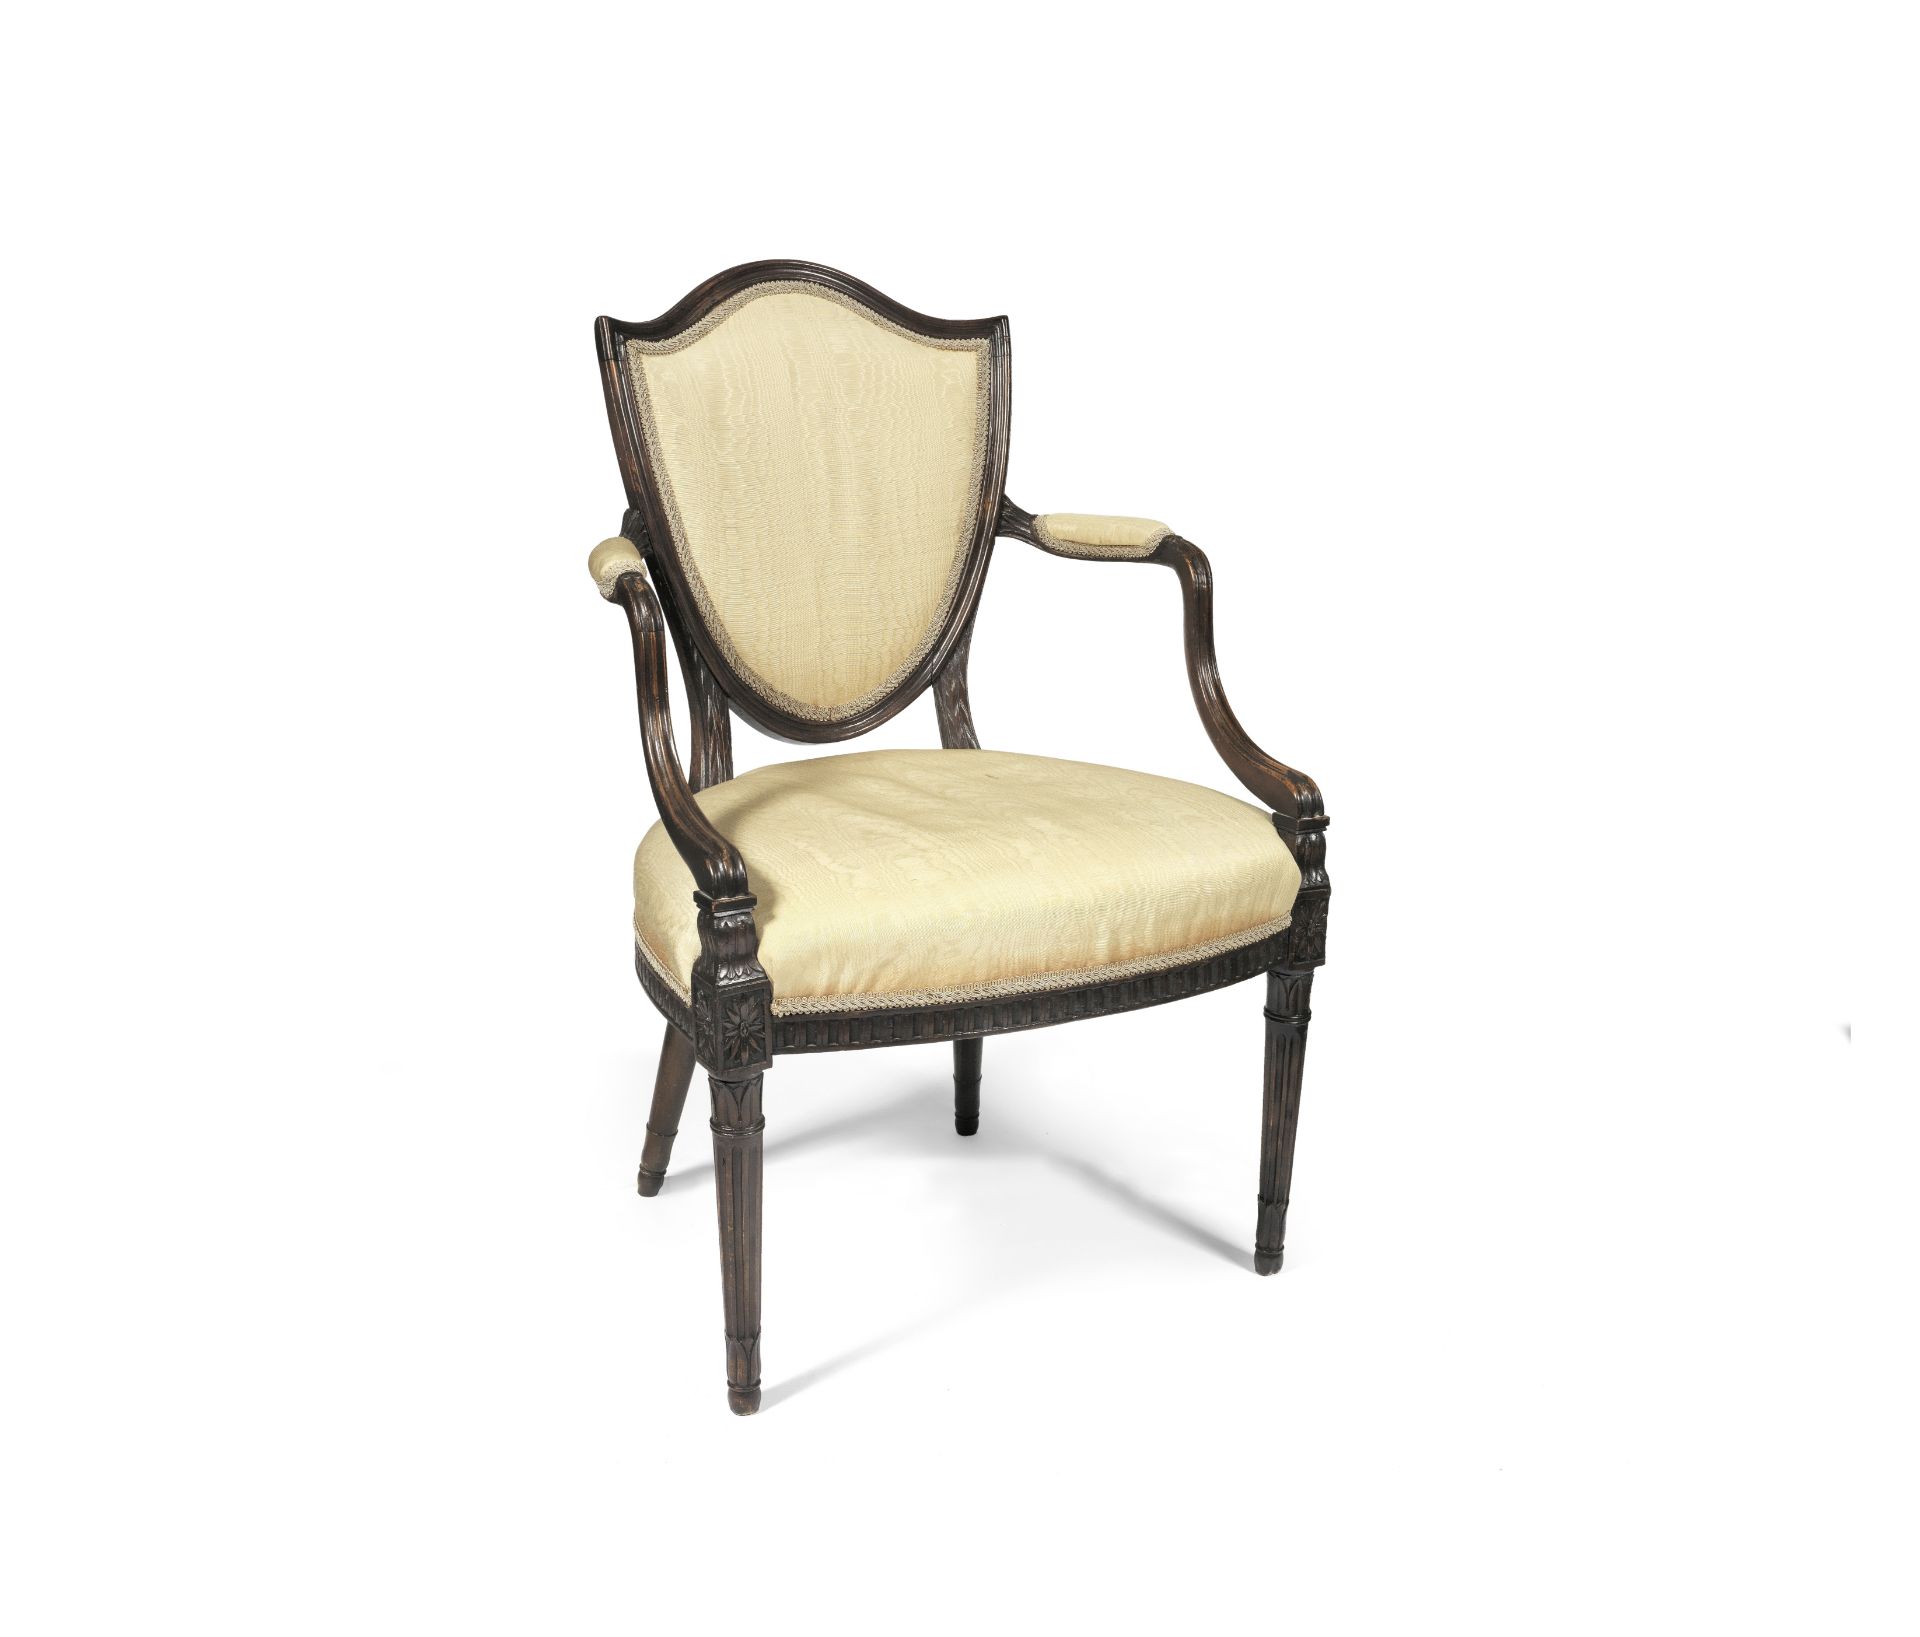 A George III stained beech open armchair attributed to Gillows after a design by James Wyatt